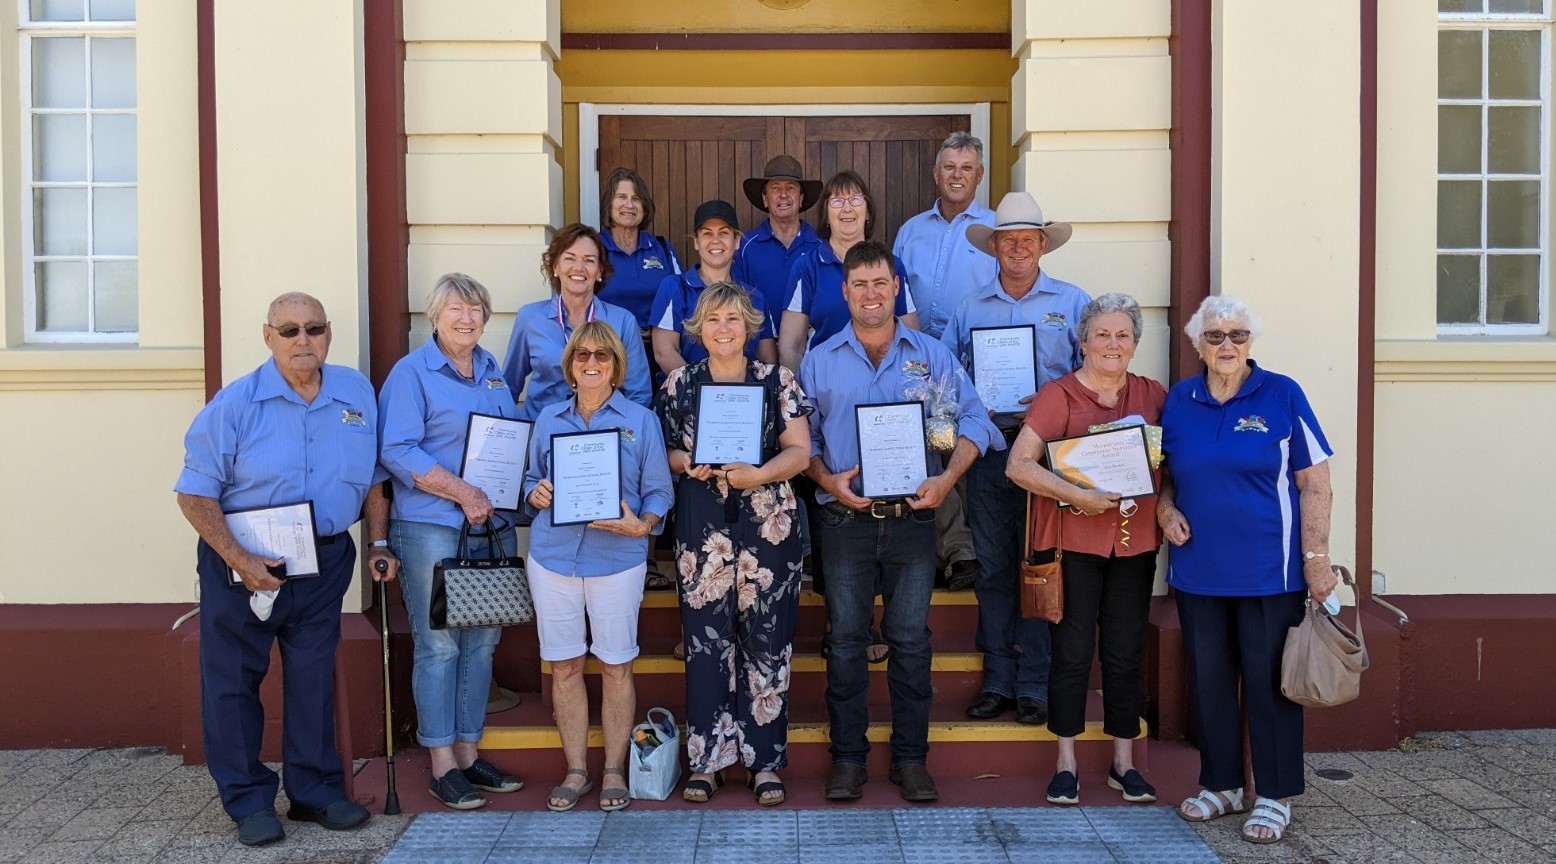 Waroona Agricultural Society Receives Australia Day Award in 2022